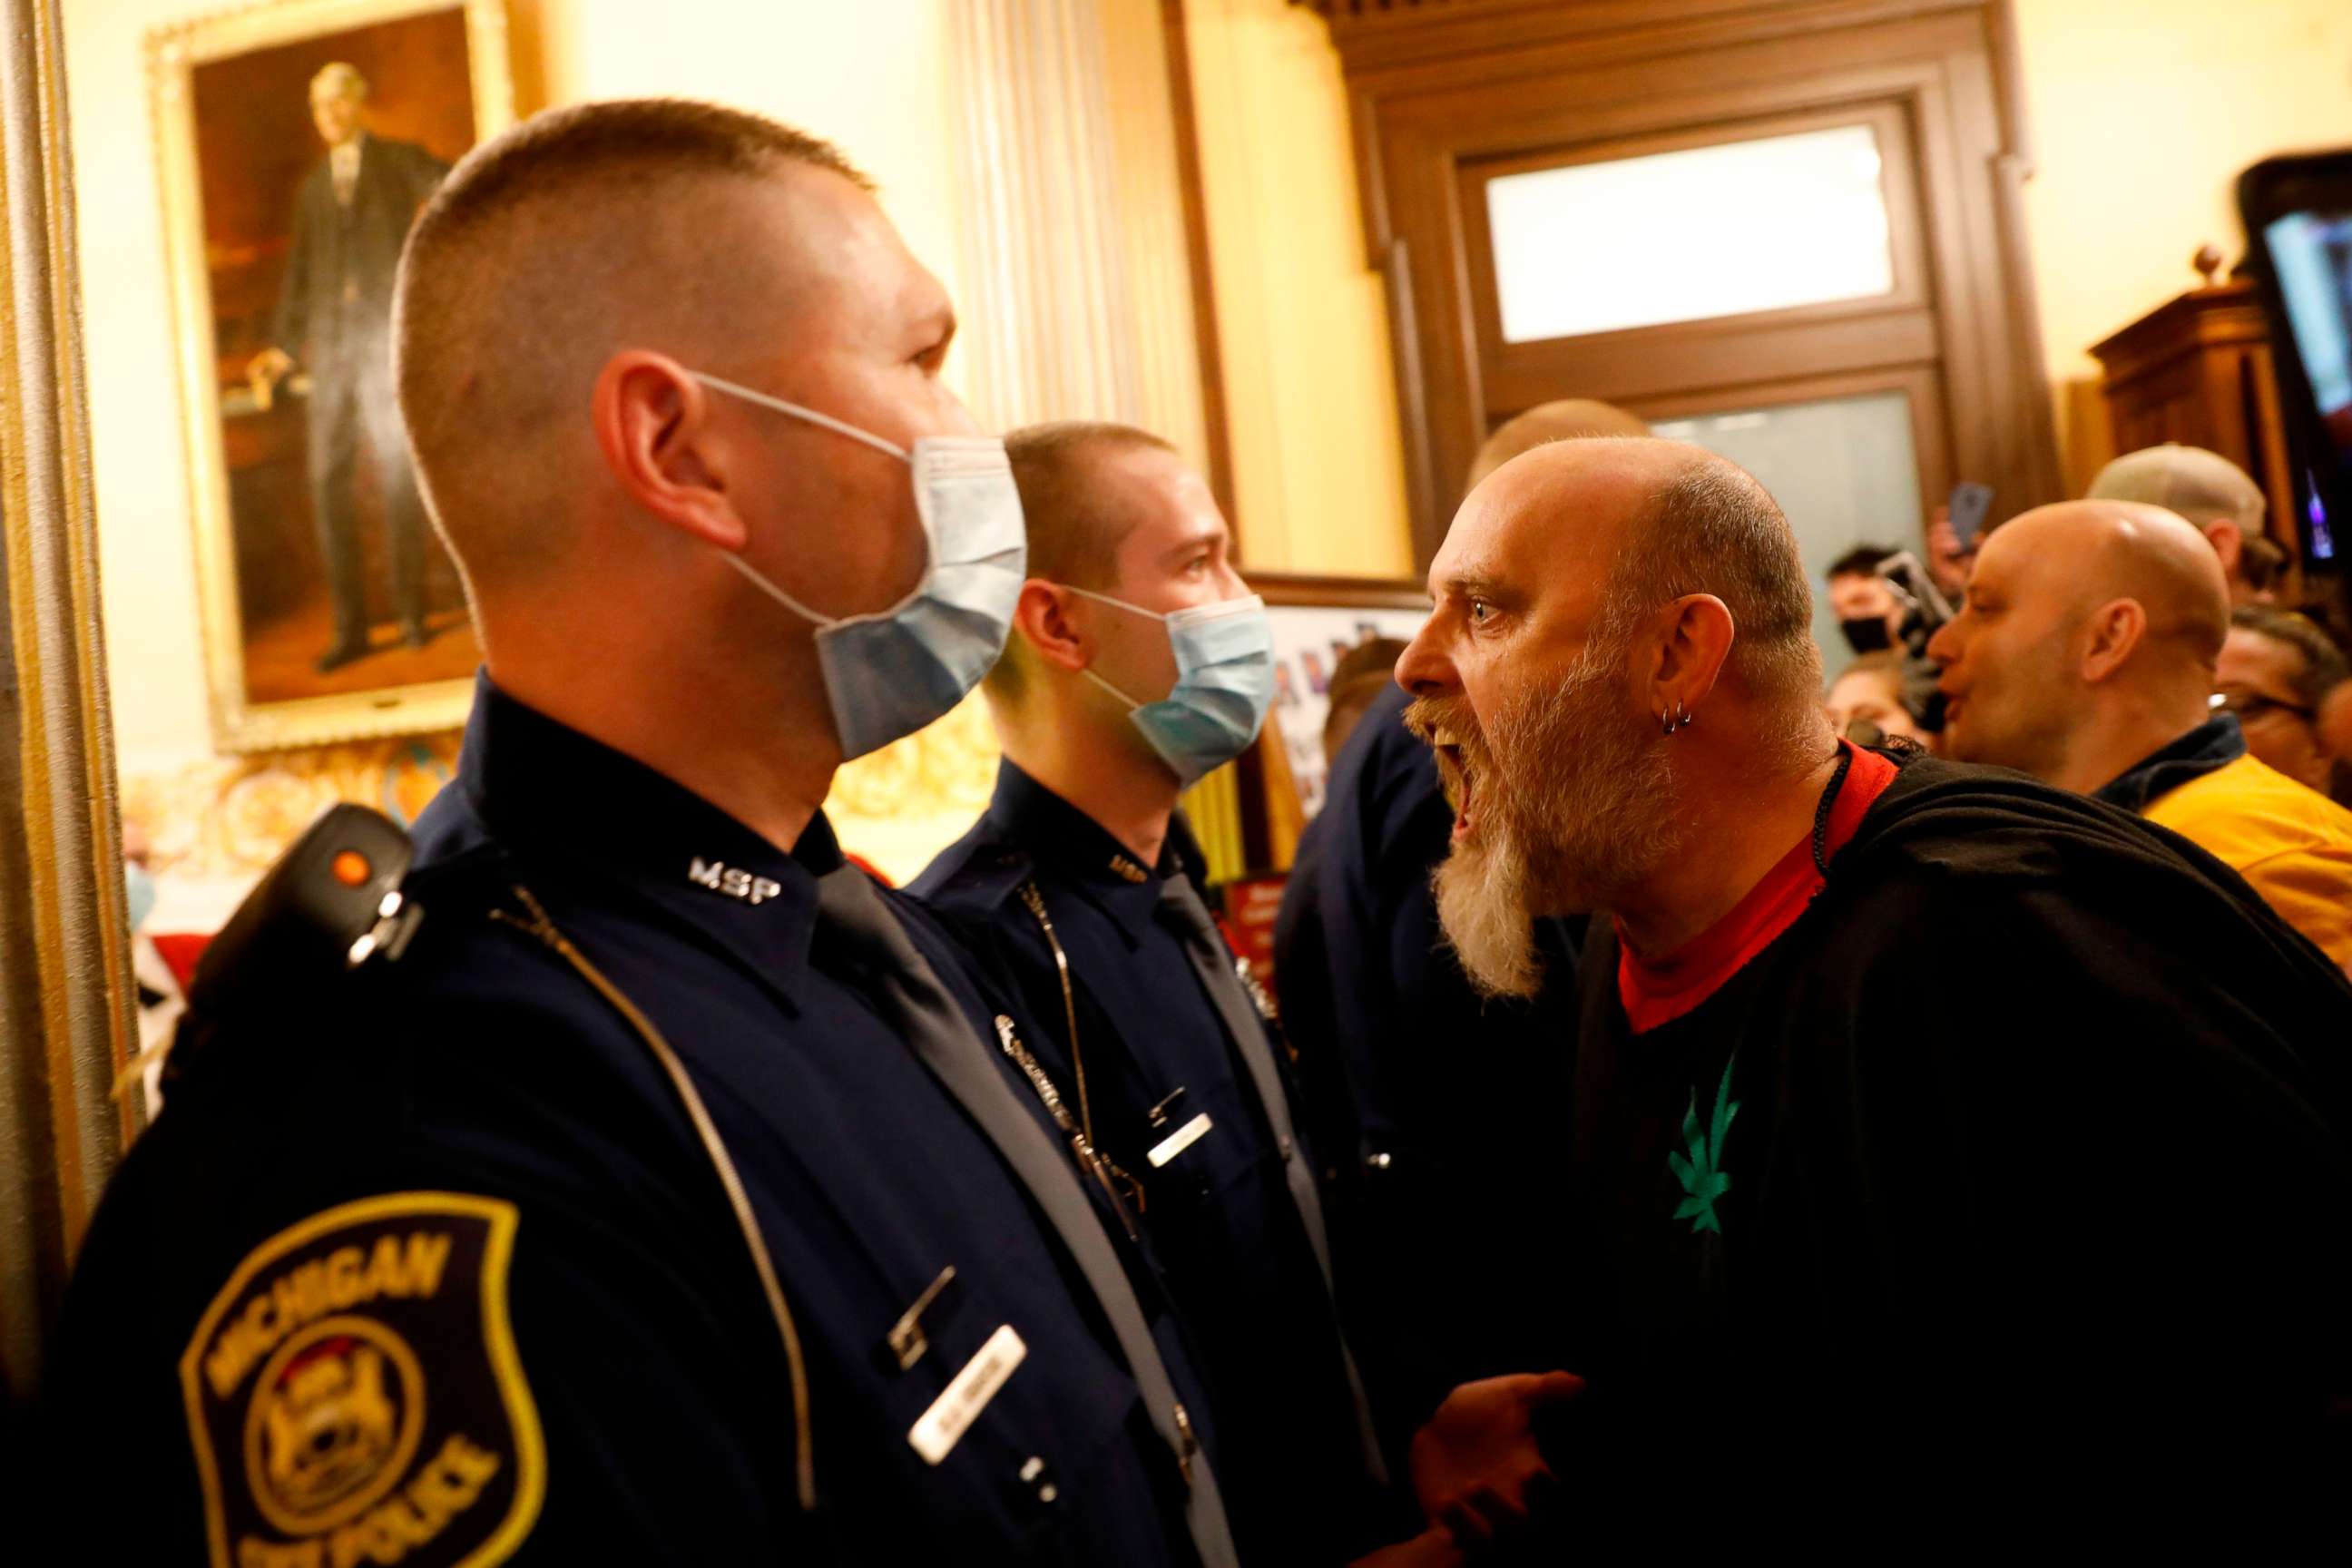 PHOTO: Protesters try to enter the Michigan House of Representative chamber after the American Patriot Rally for the reopening of businesses on the steps of the Michigan State Capitol in Lansing, Mich., April 30, 2020.